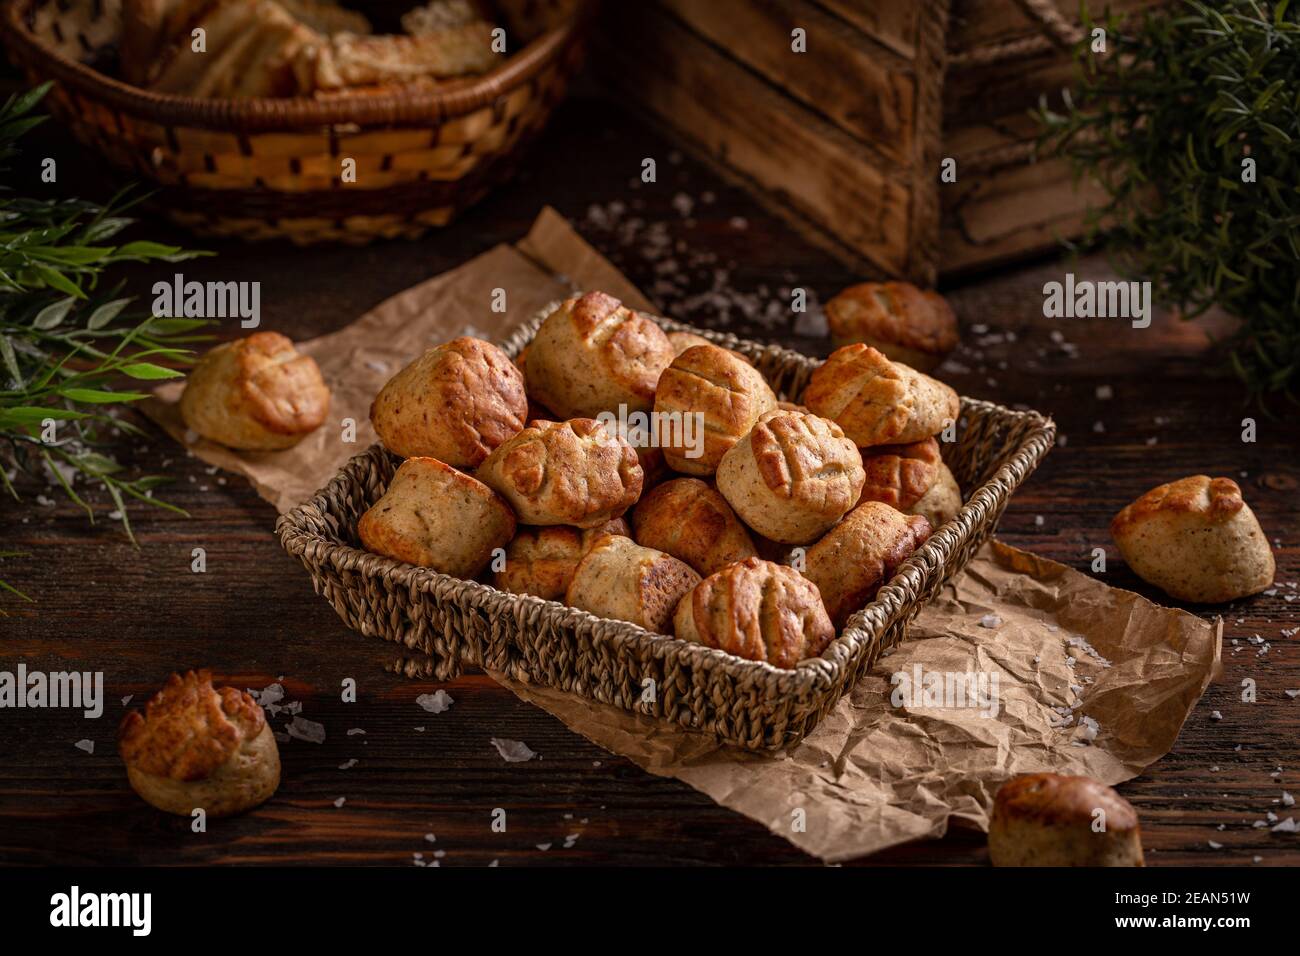 Hungarian scones with pork crackling Stock Photo